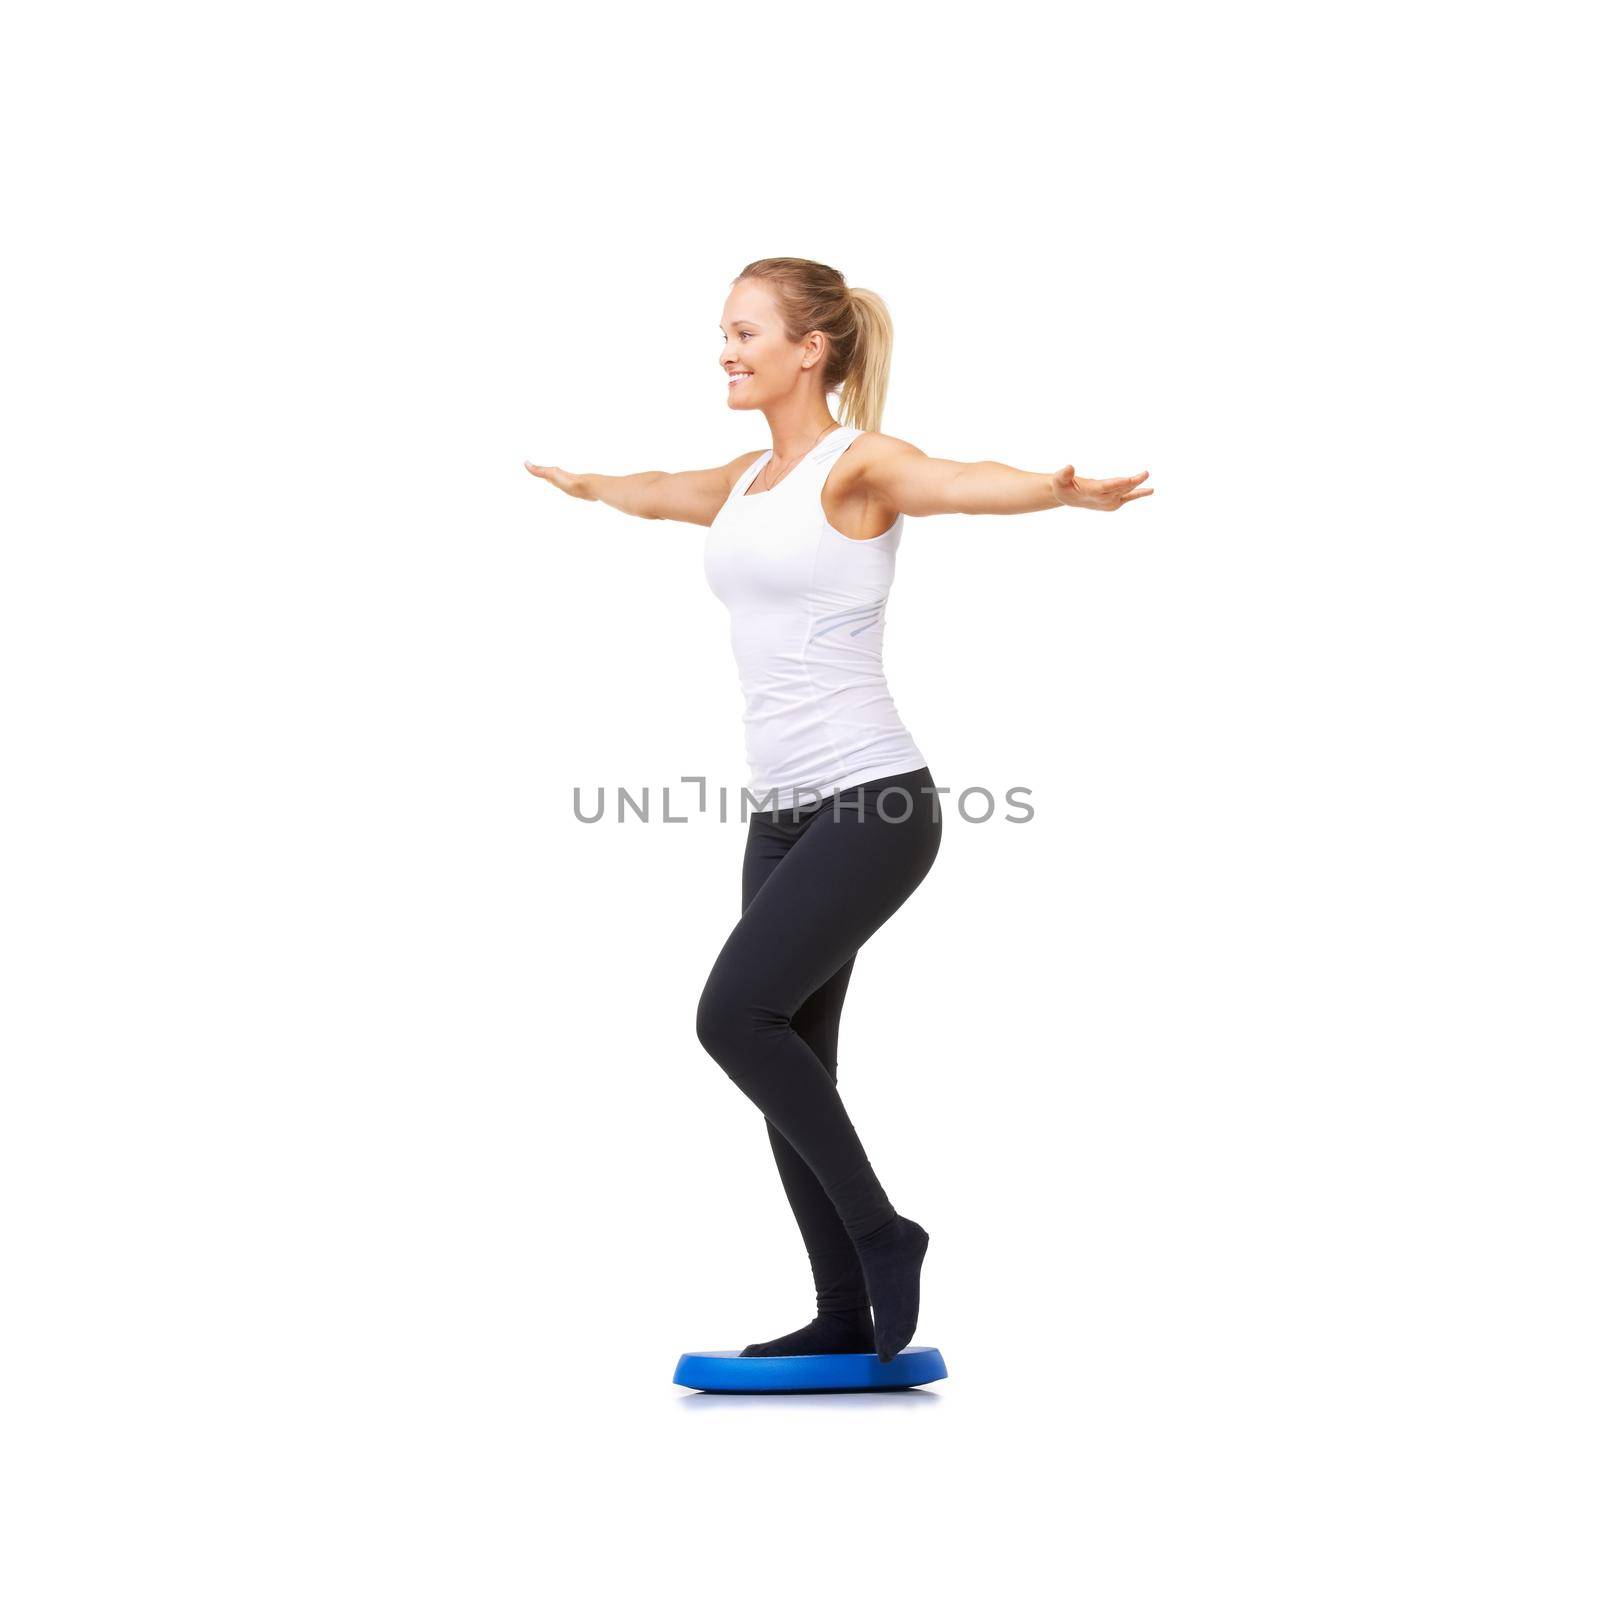 Keeping her footing steady. Full length studio shot of an attractive woman doing balance exercises isolated on white. by YuriArcurs